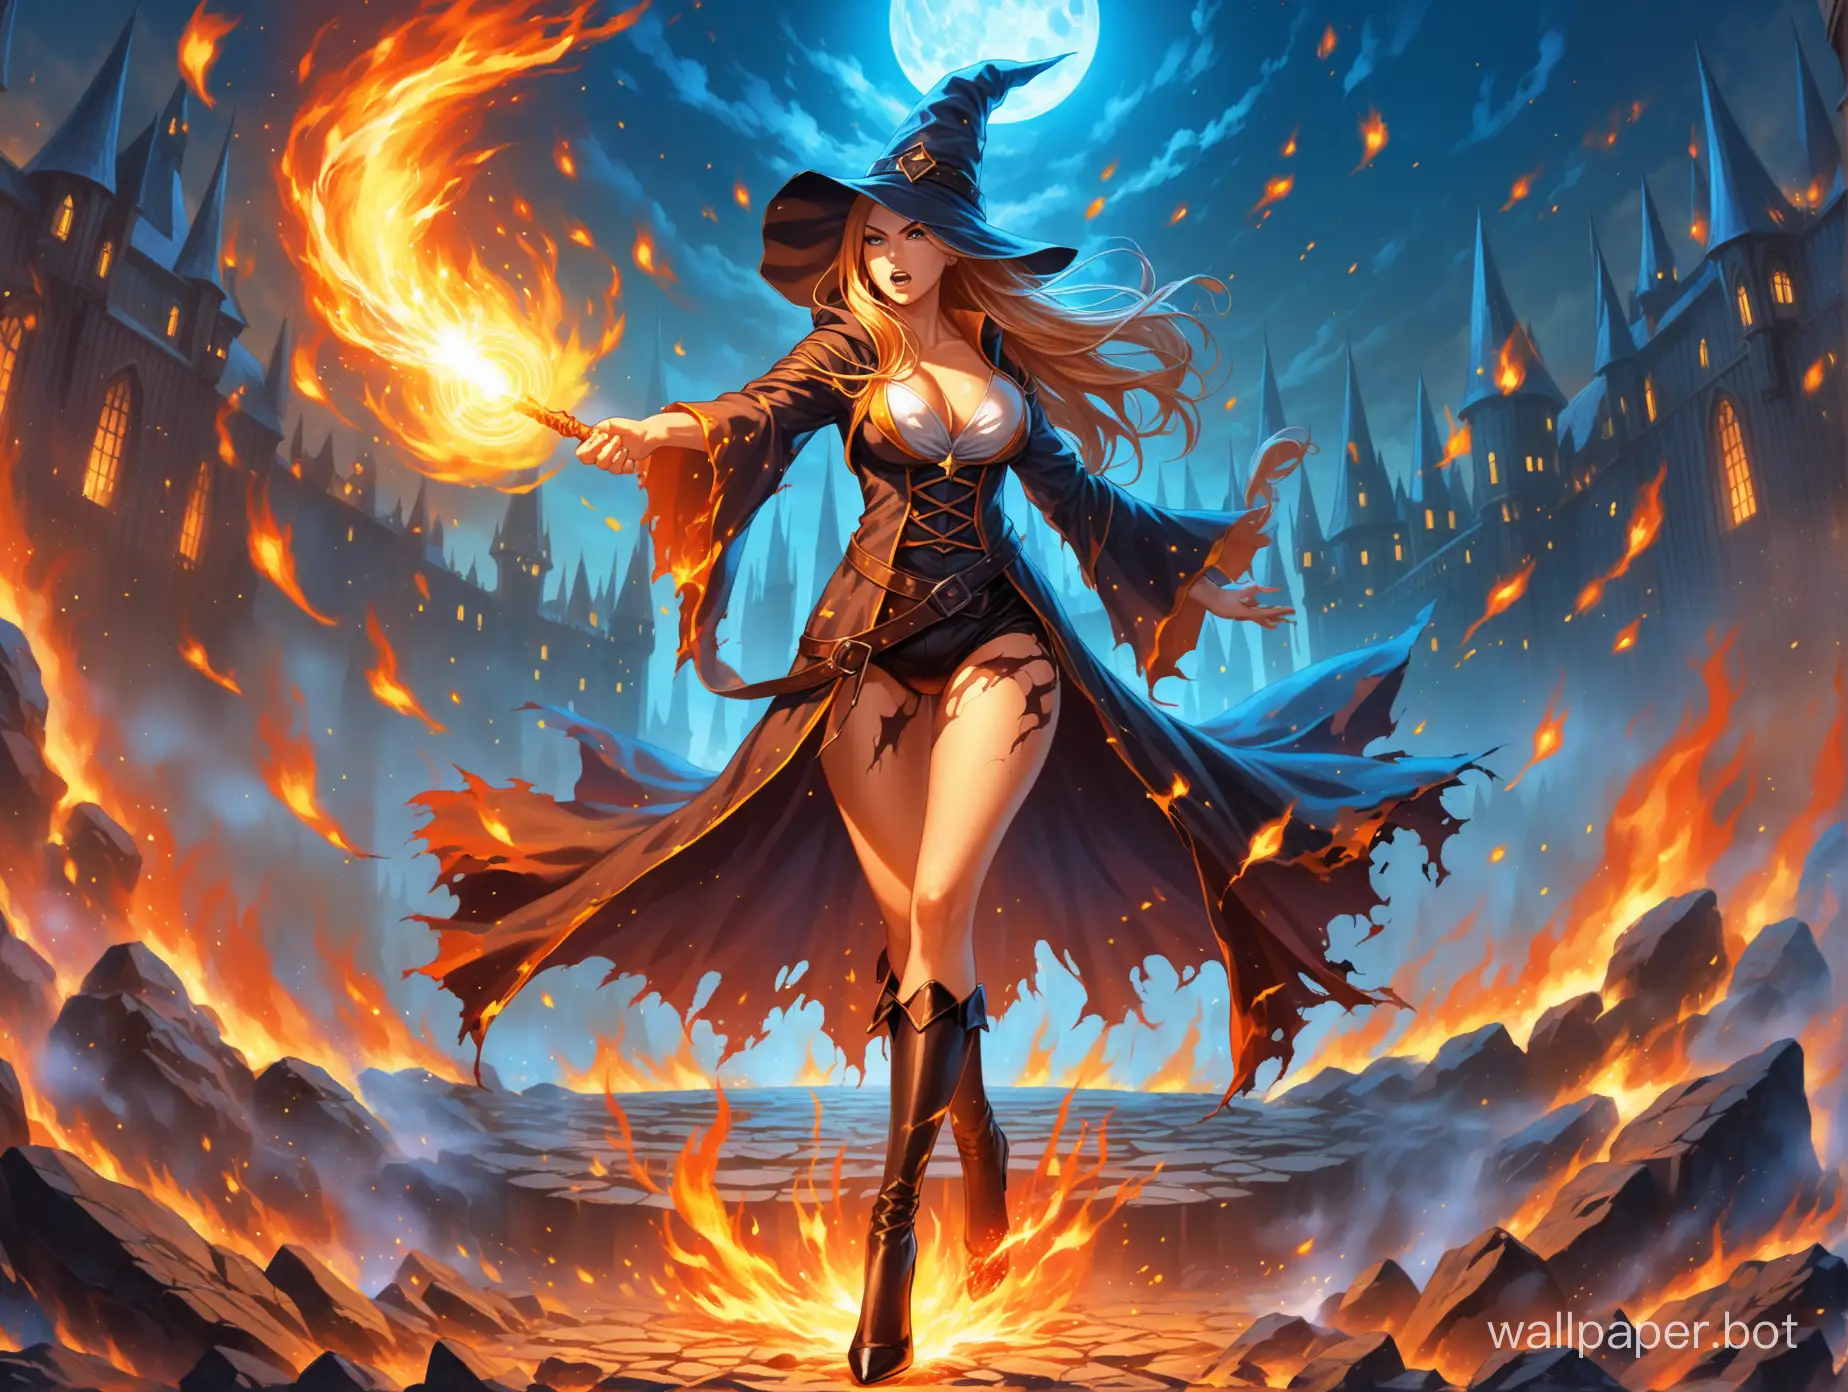 Sultry-Female-Wizard-Battling-with-Fire-Spell-in-Torn-Clothes